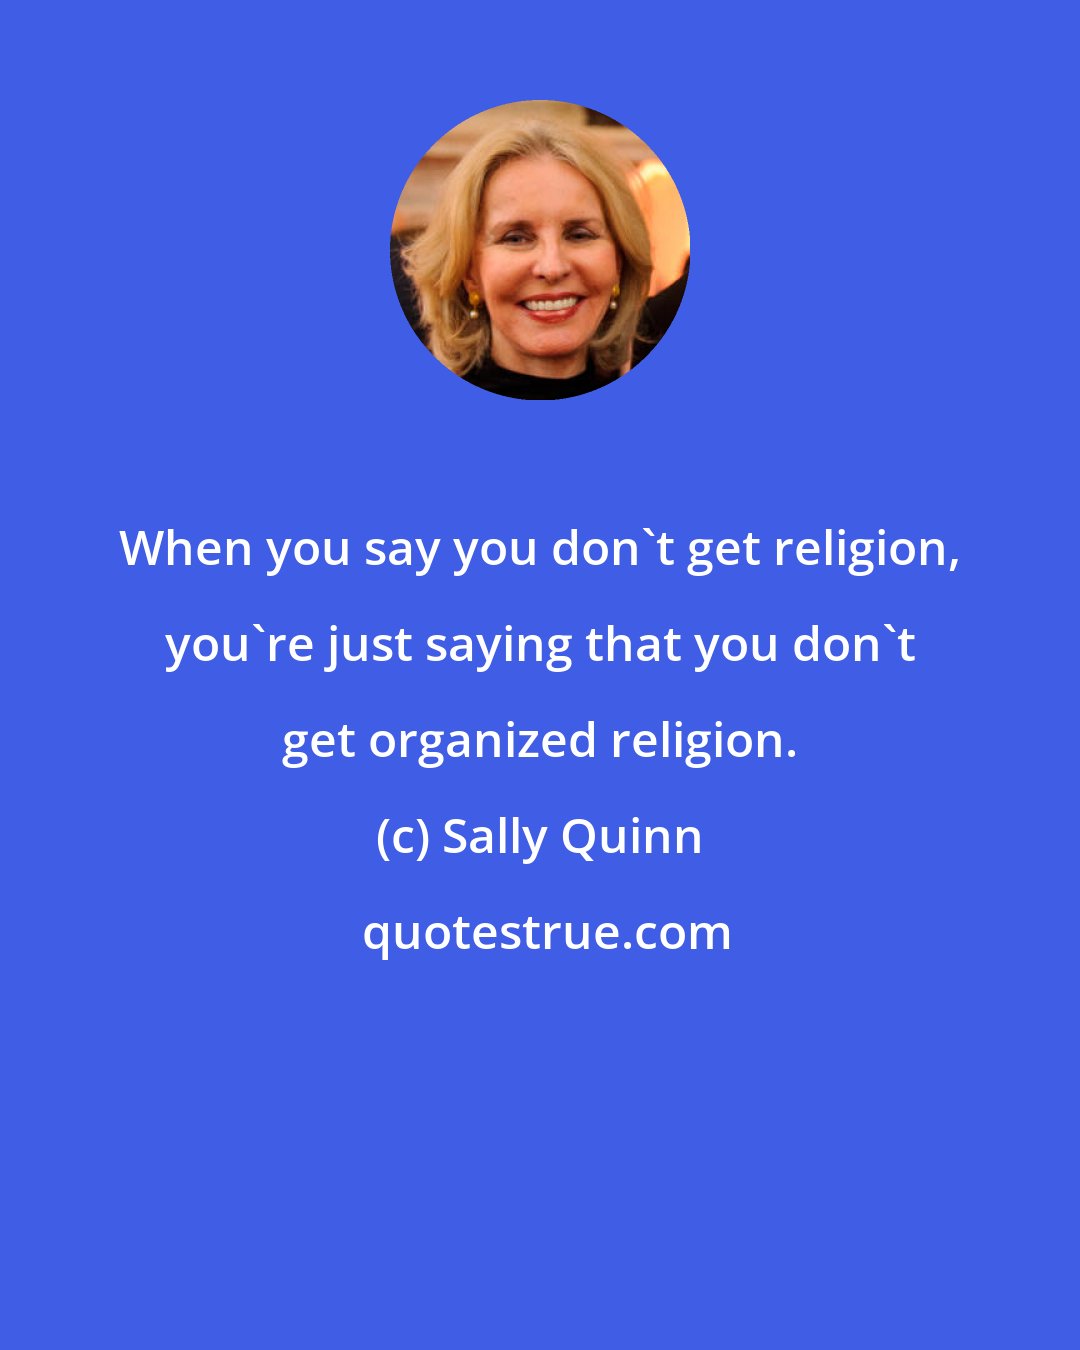 Sally Quinn: When you say you don't get religion, you're just saying that you don't get organized religion.